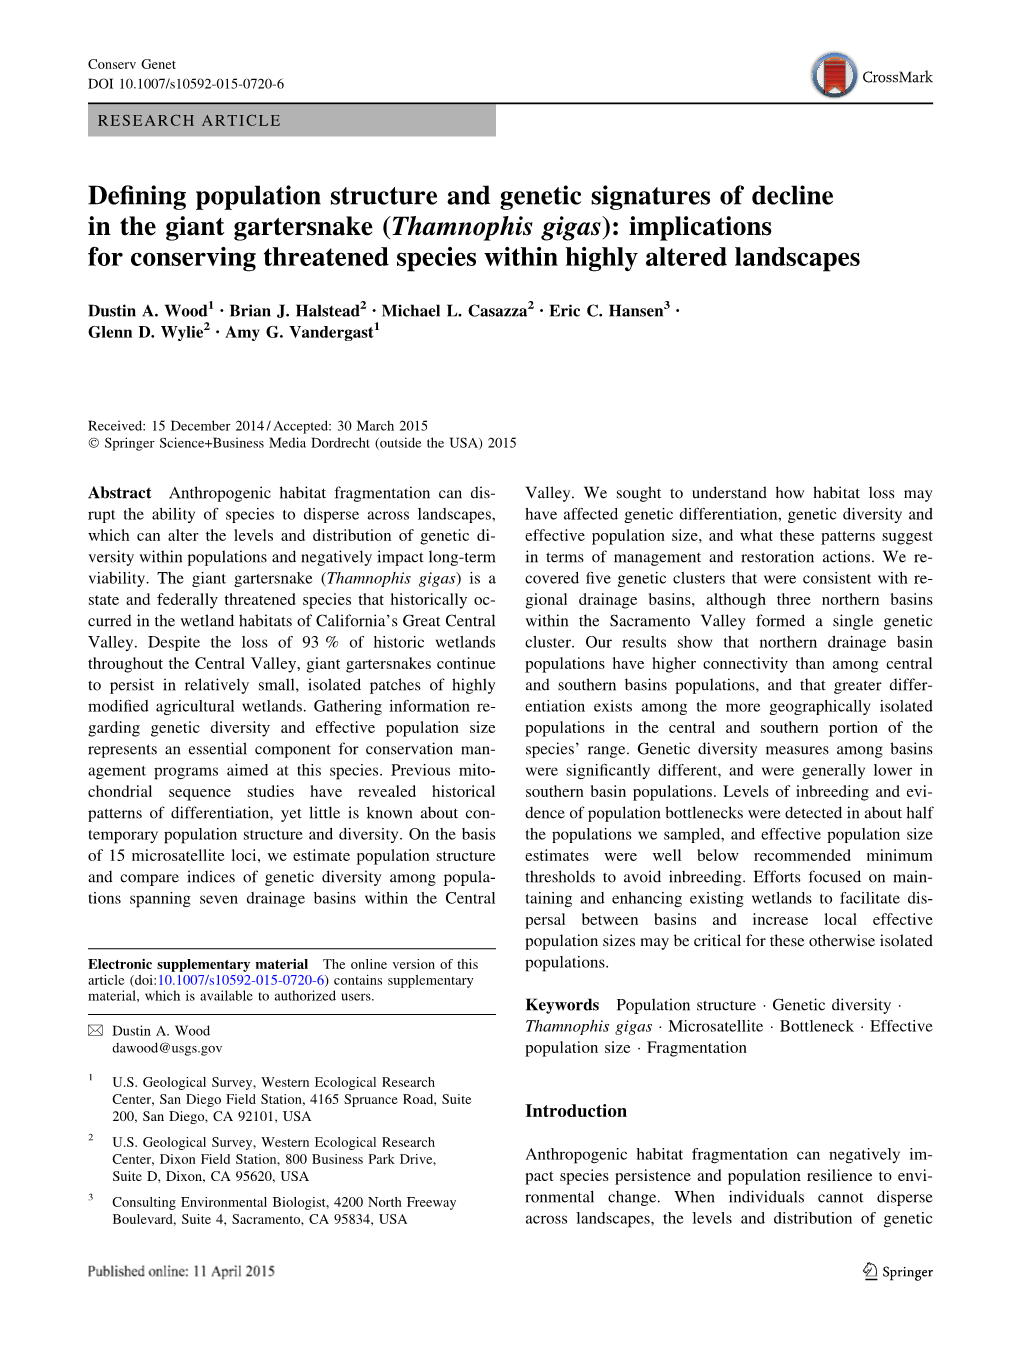 Defining Population Structure and Genetic Signatures of Decline in the Giant Gartersnake